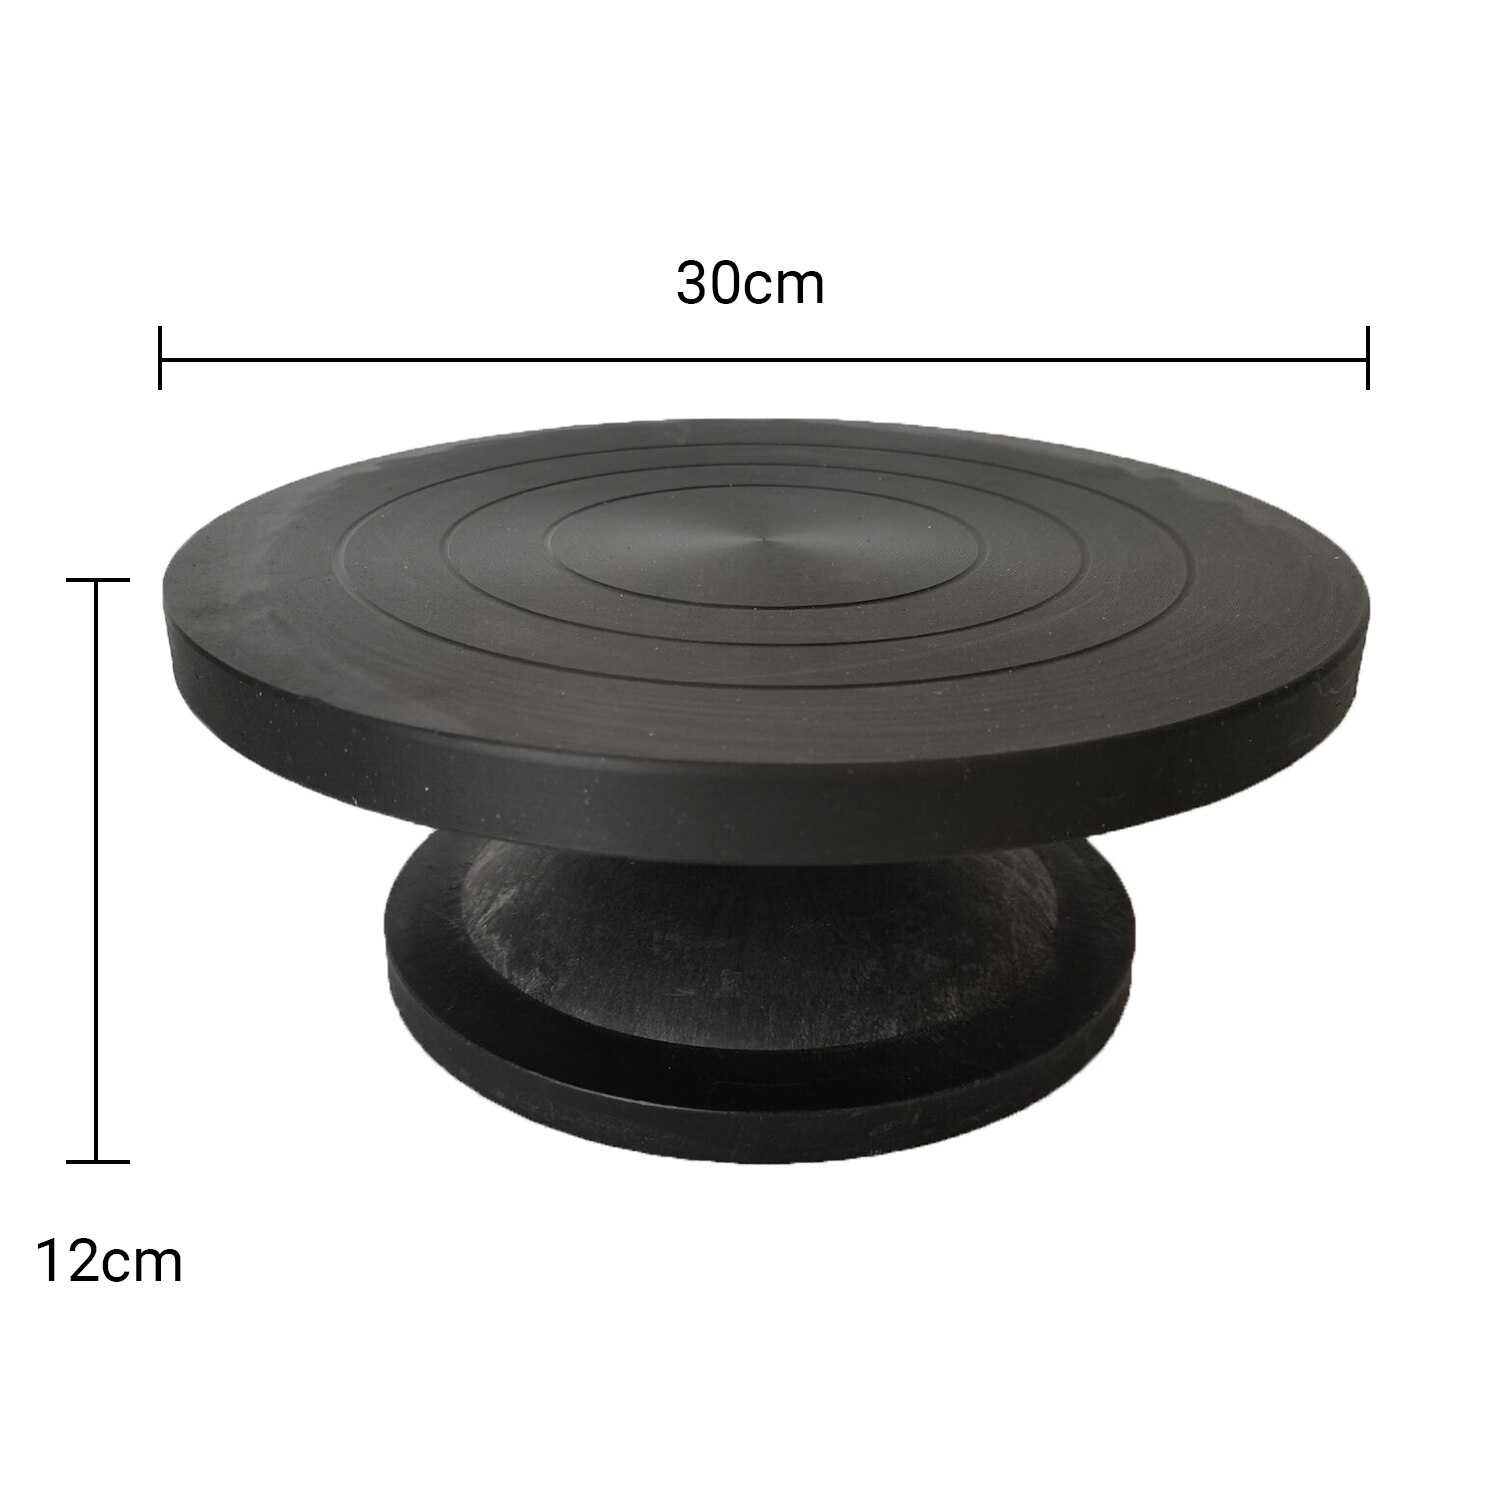 Art Supply 10in Diameter Sculpting Wheel Mini Clay Making Pottery Wheel Turntable with Ball Bearings Pottery Wheel Pottery: 30cm diameter